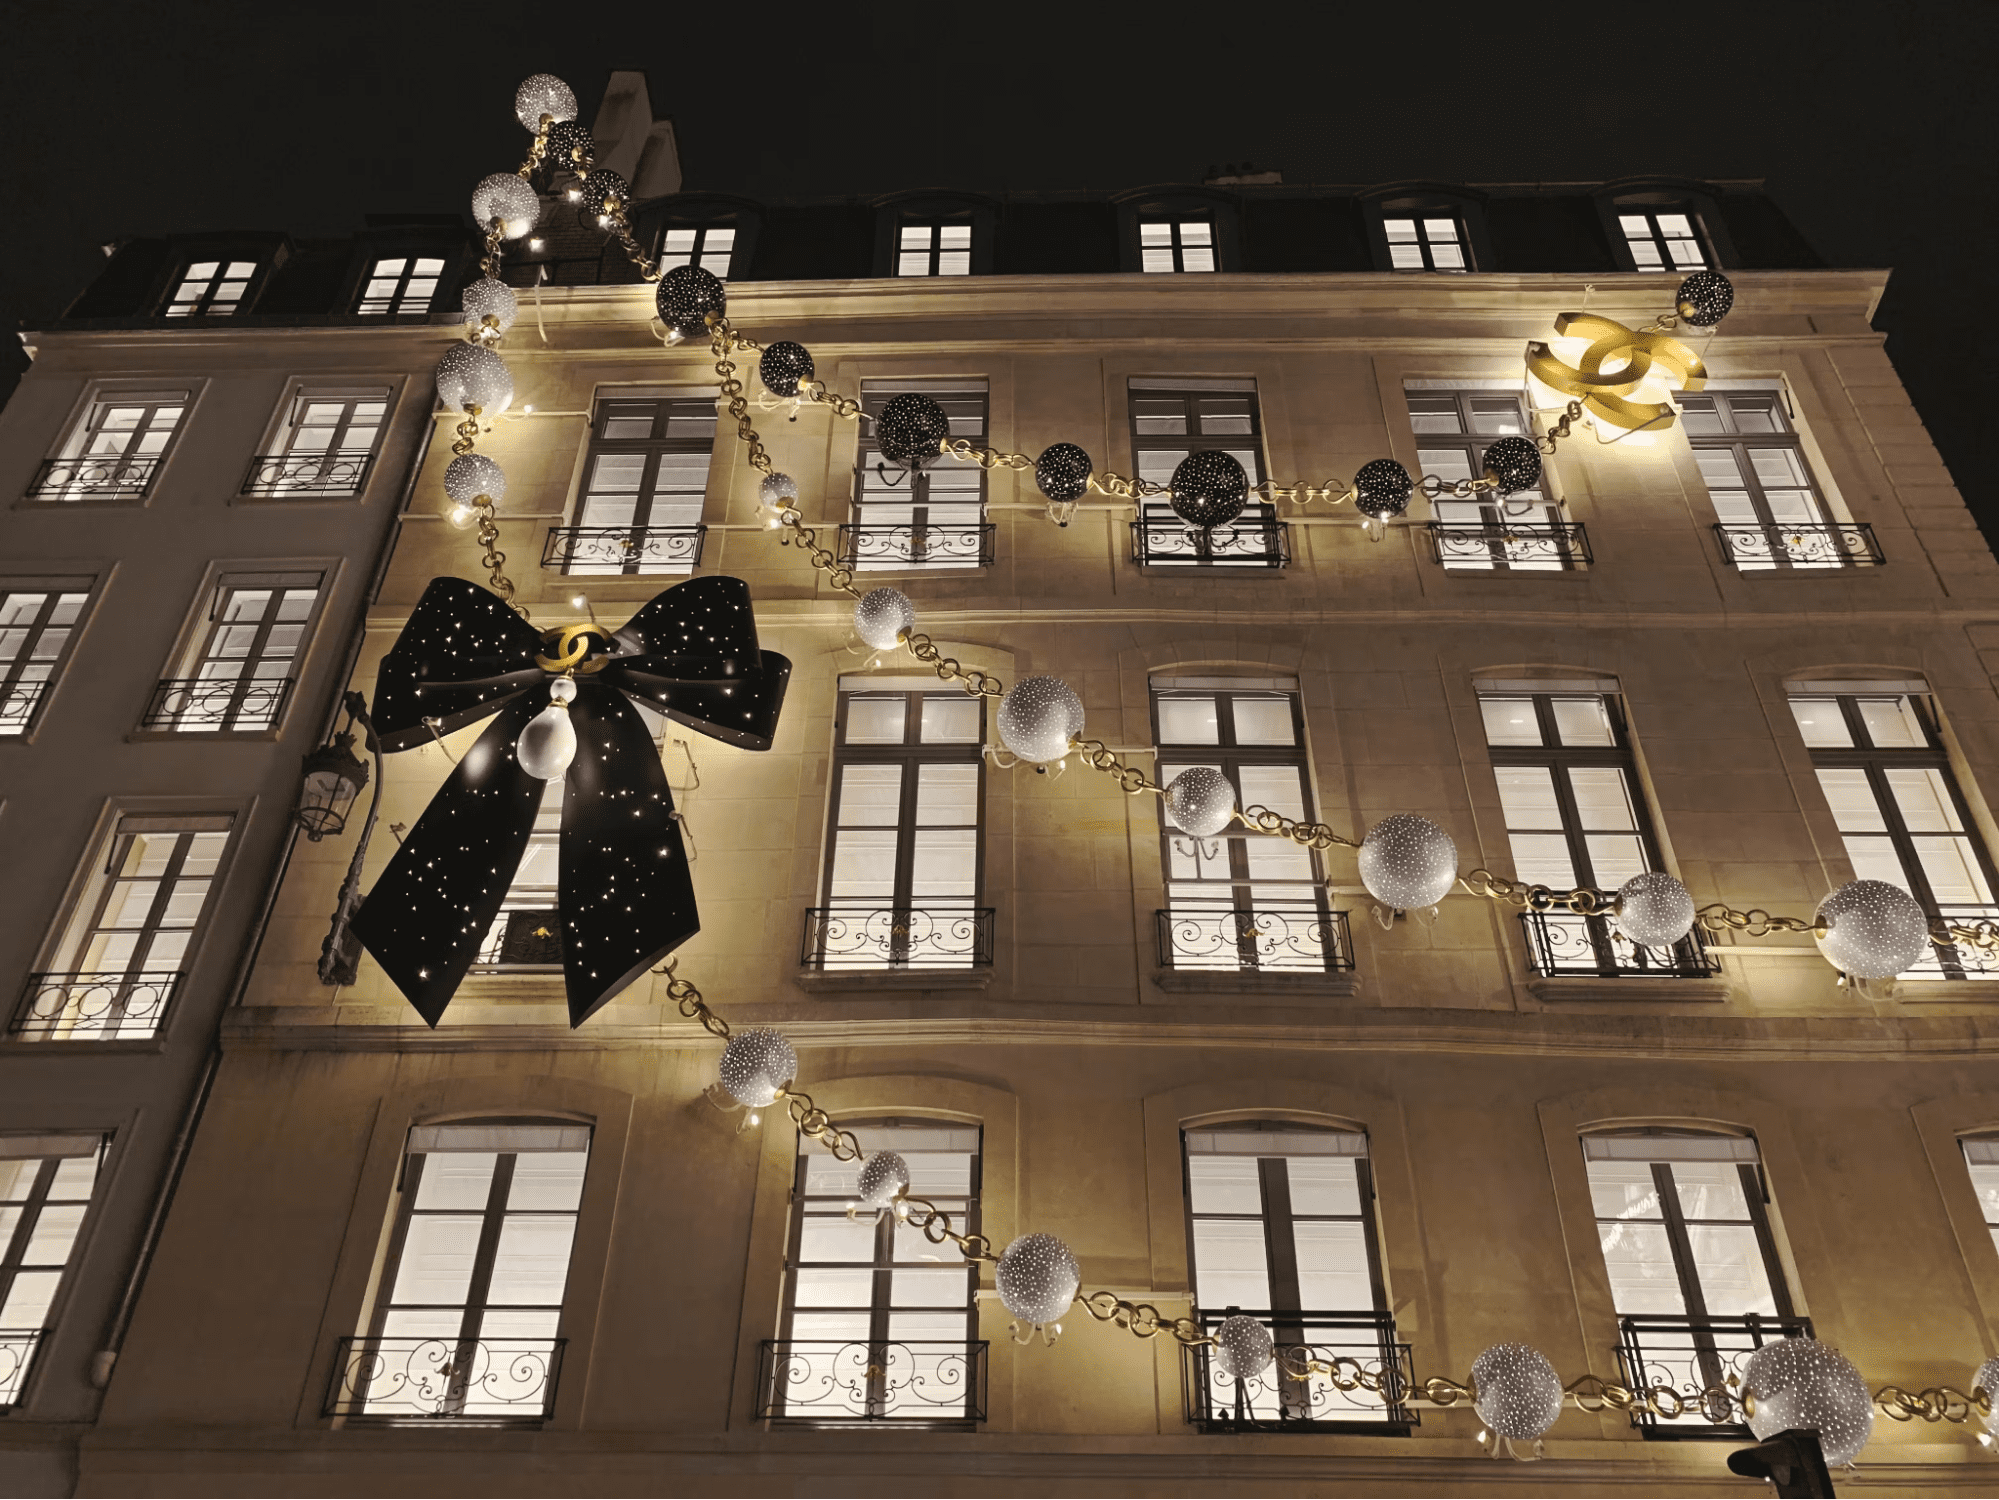 Chanel has beautifully decorated the facade of building